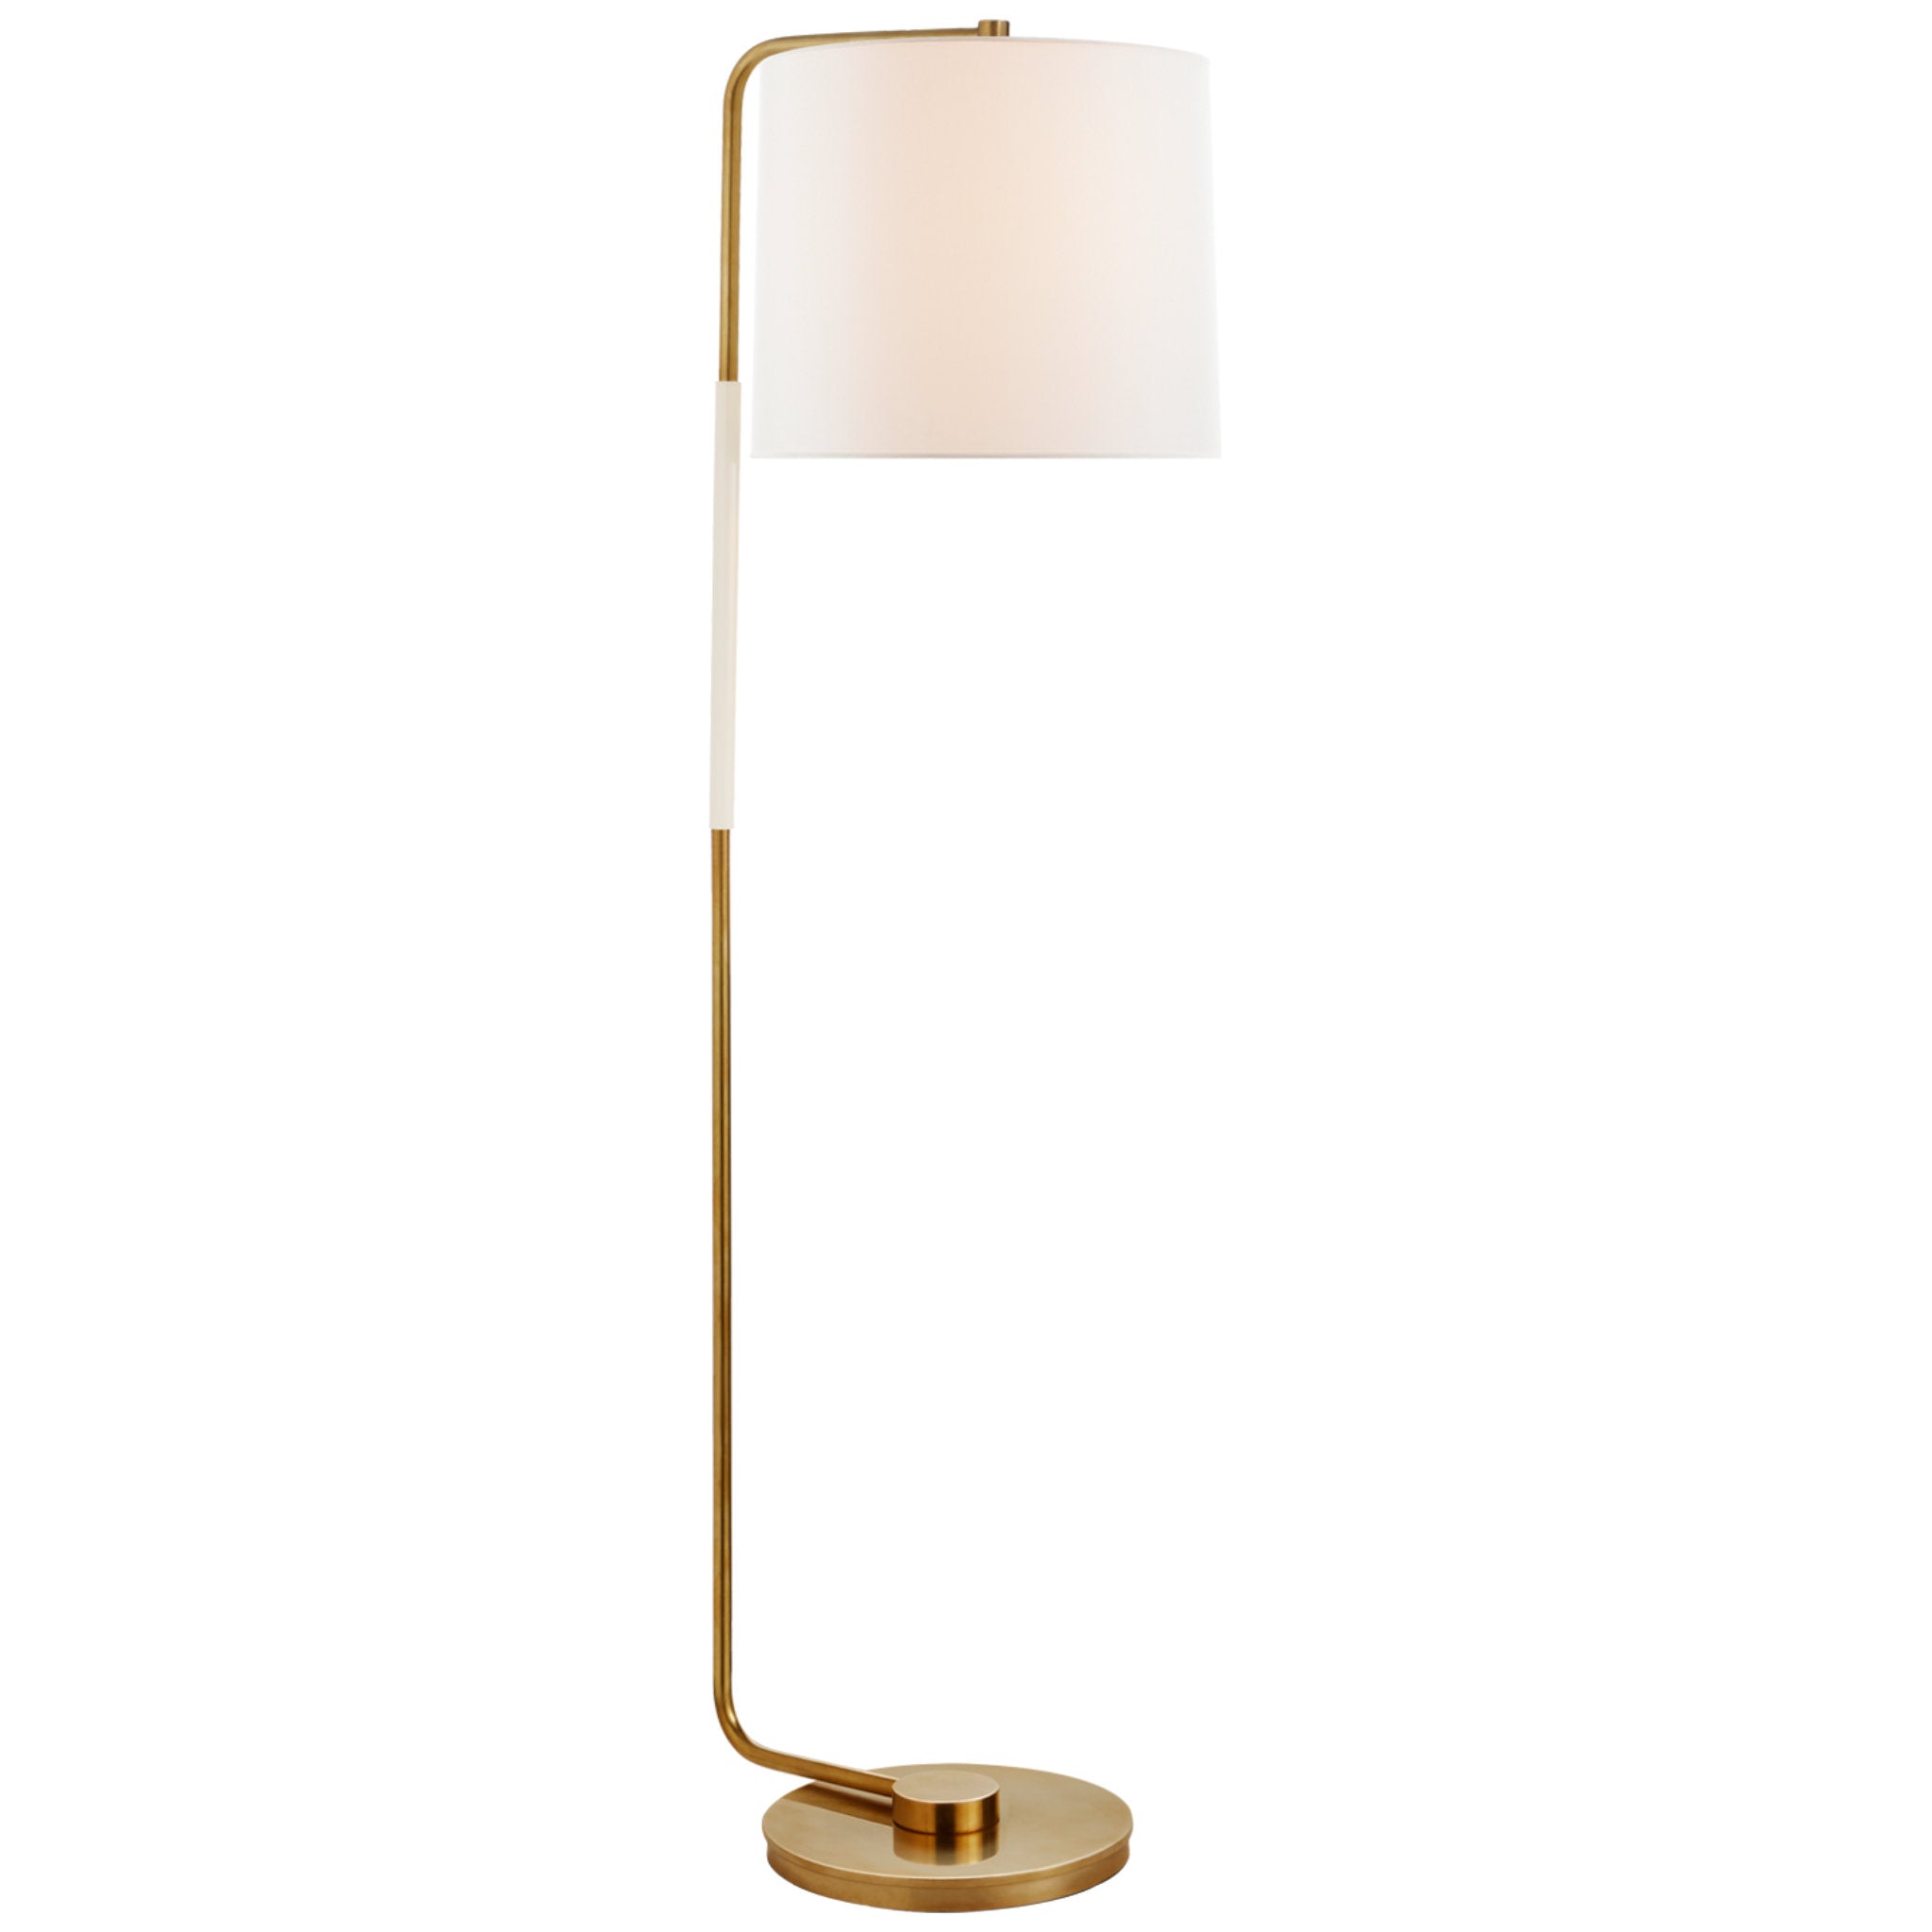 Barbara Barry Swing Articulating Floor Lamp in Soft Brass with Linen Shade